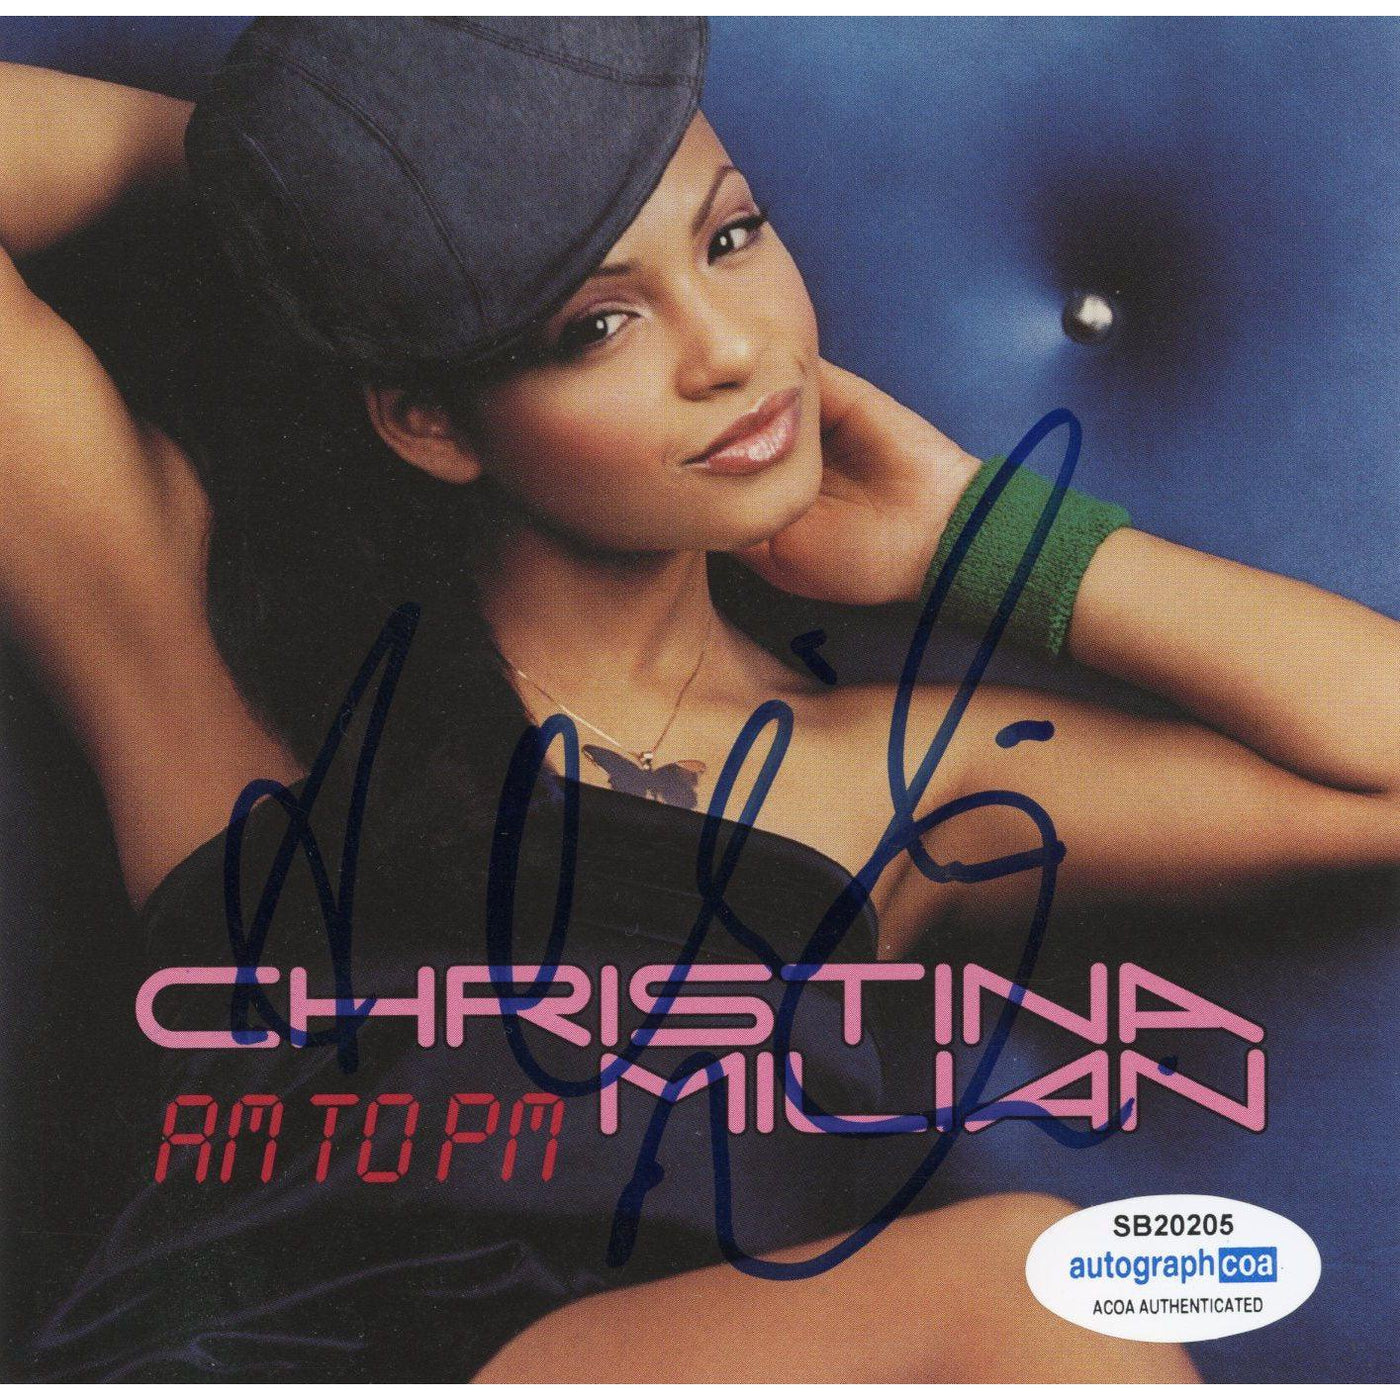 Christina Milian Signed CD Cover AM TO PM Autographed ACOA